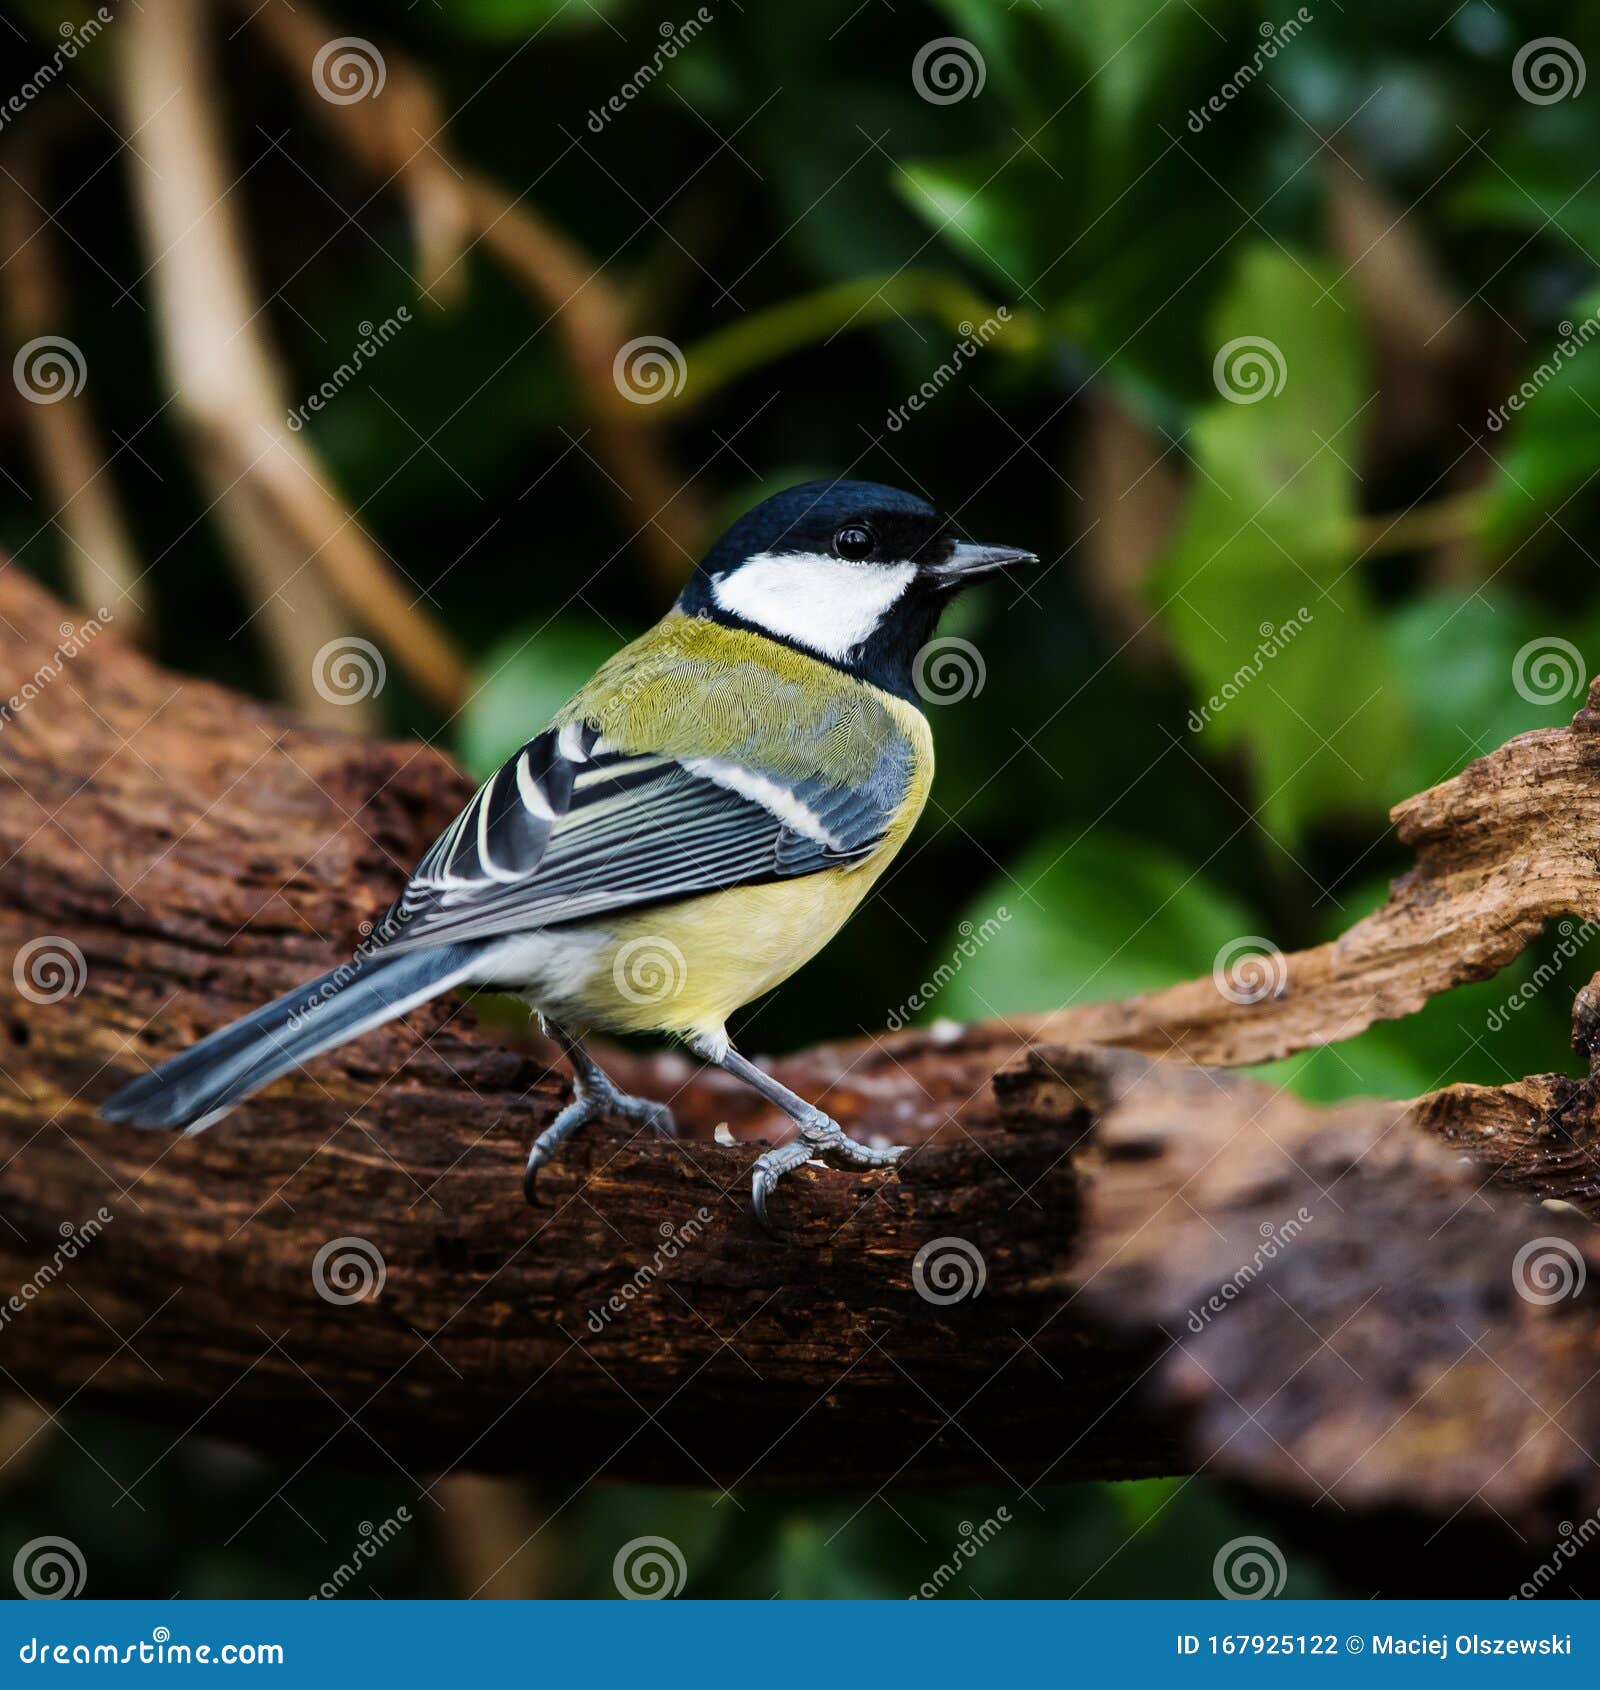 Great tits stock photo. Image of environment, tits, wildlife